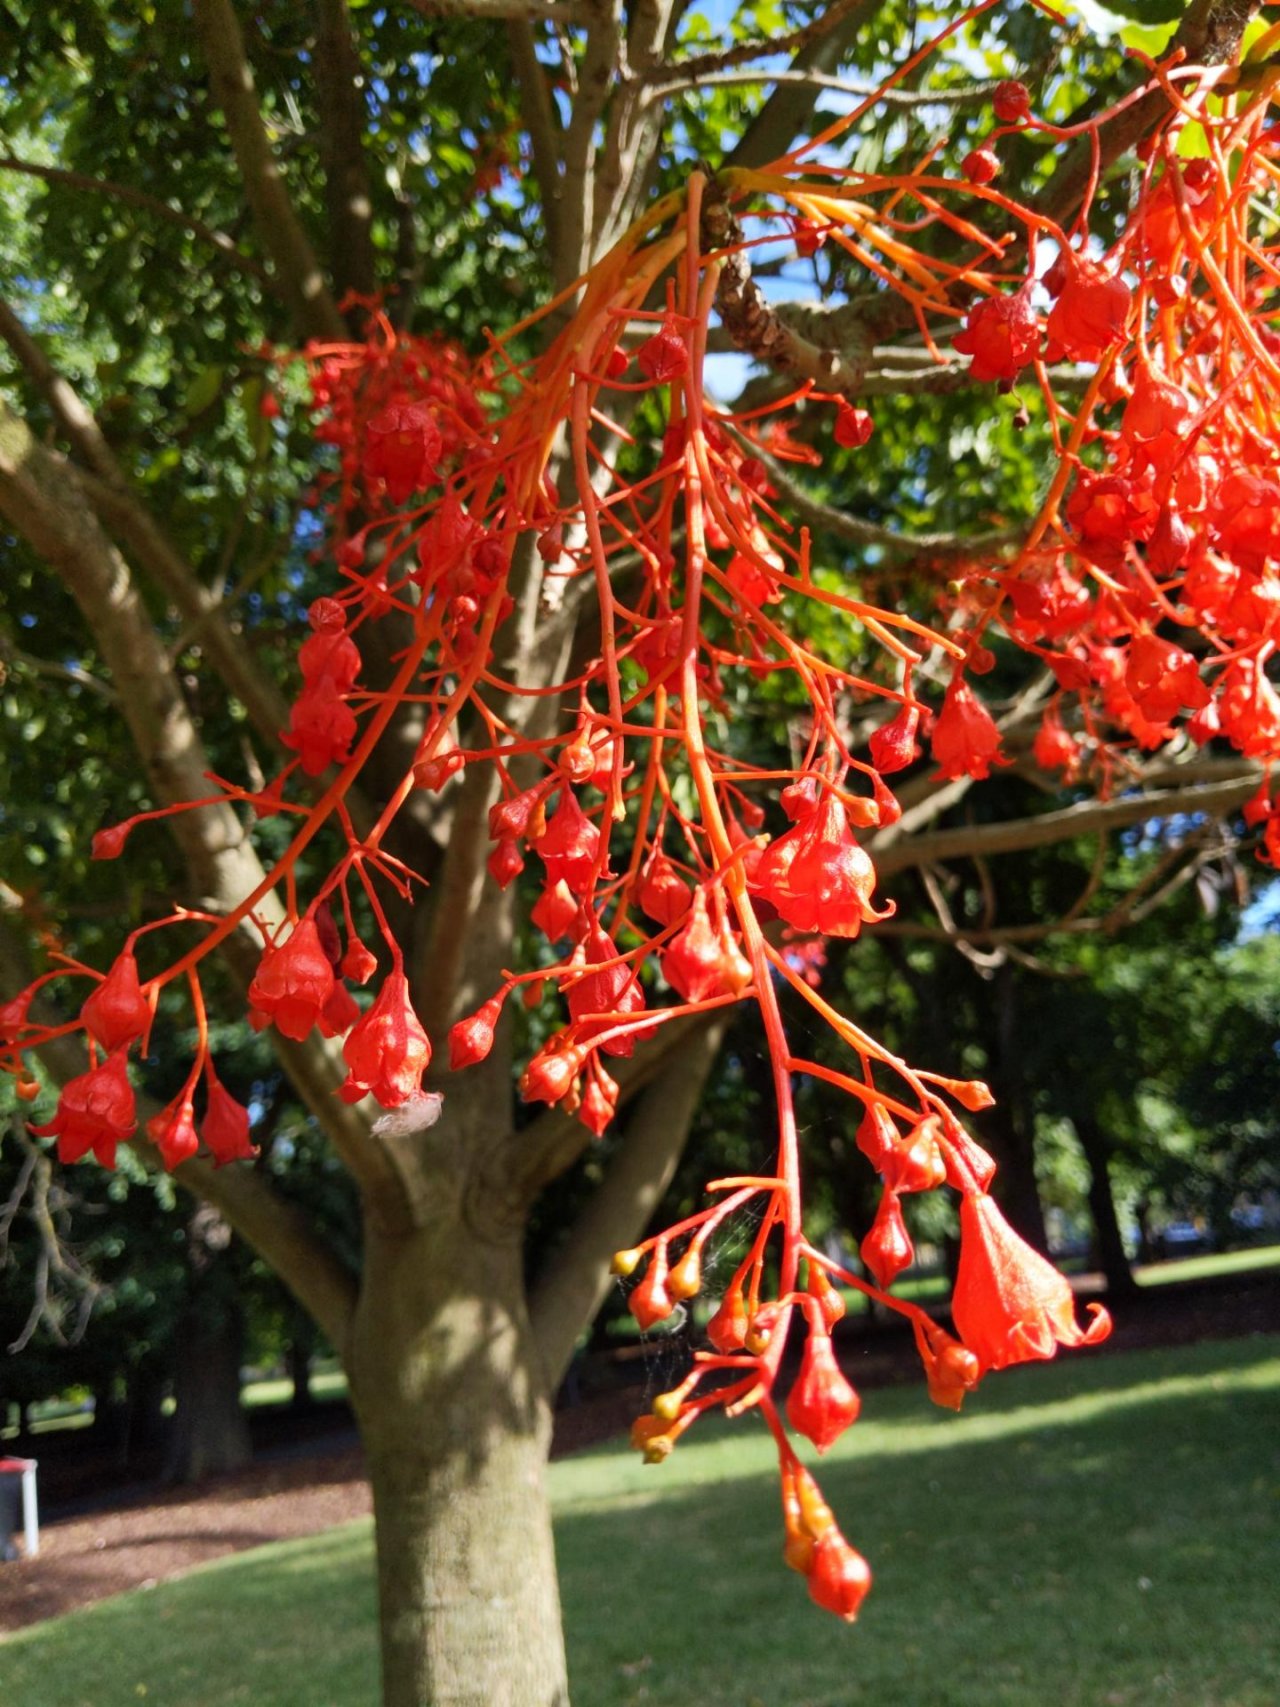 Illawarra Flame Tree in ClimateWatch App spotted by Sandra McCullough on 18.12.2020